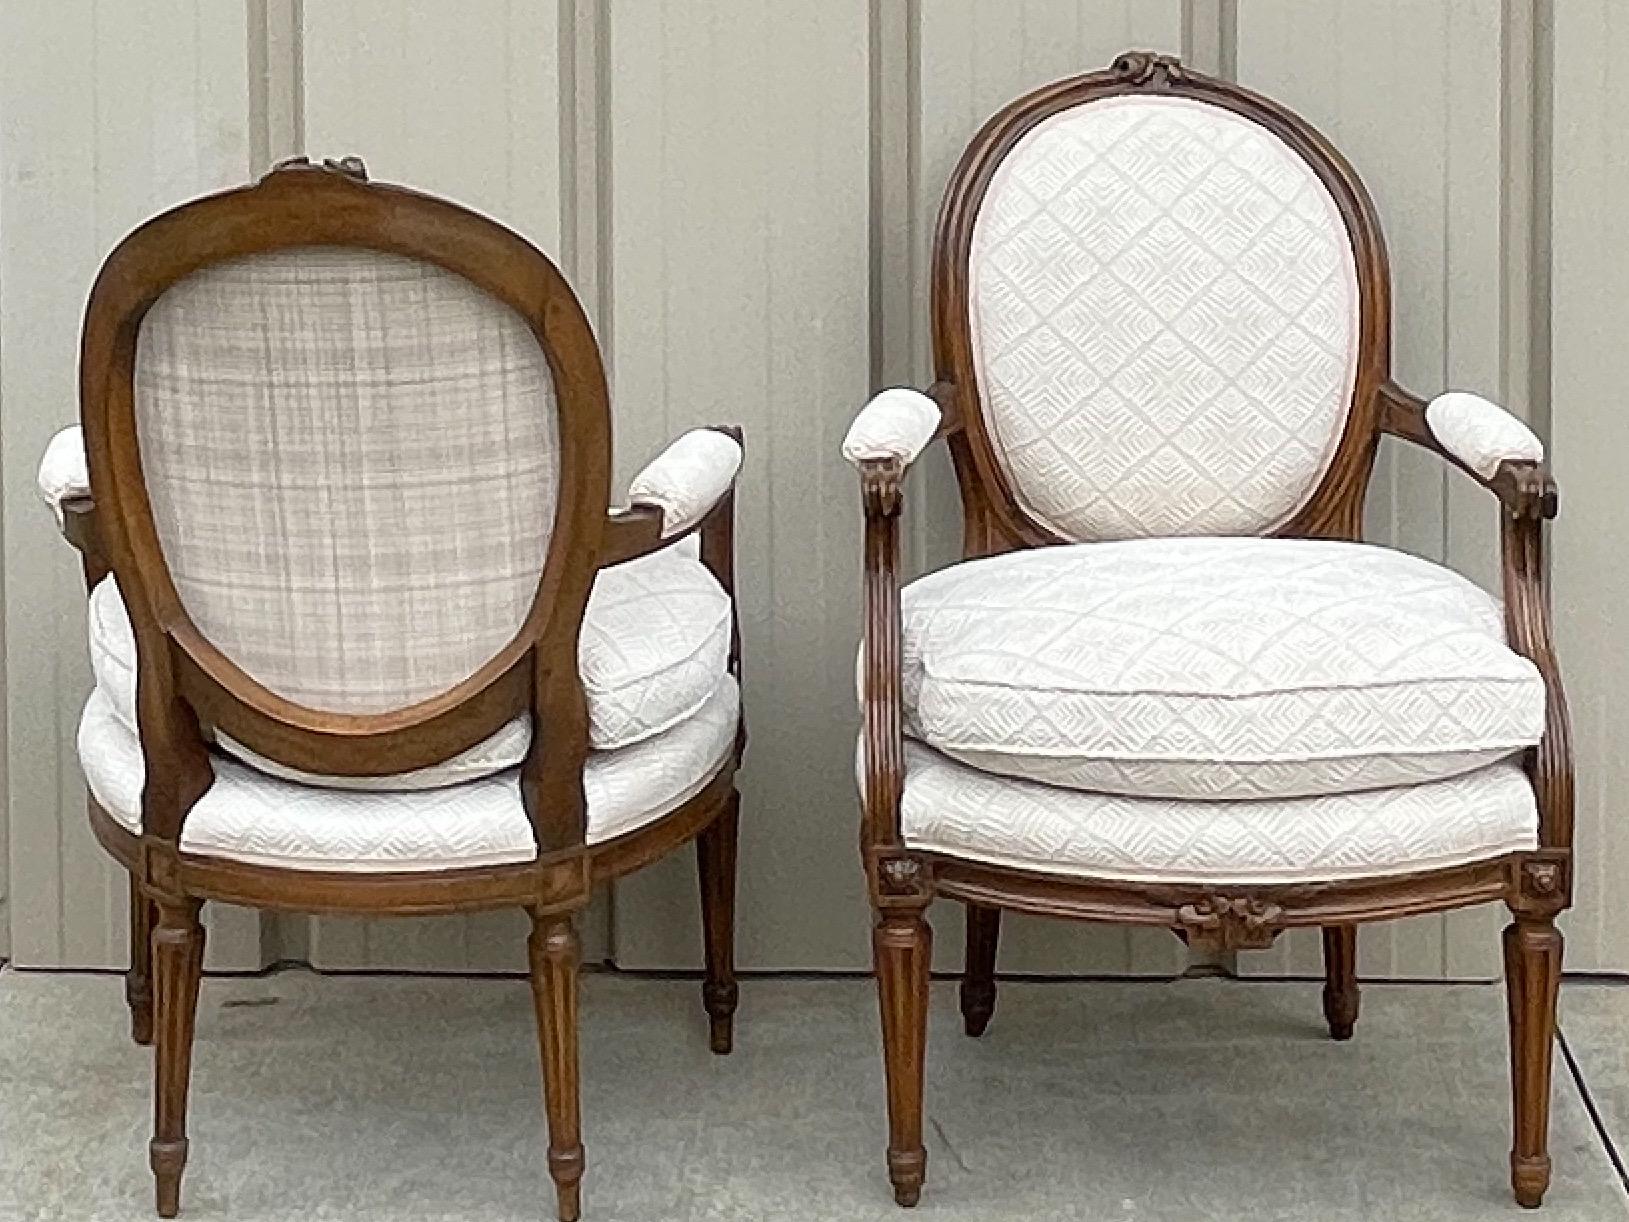 20th Century Early 20th-C. Carved Fruitwood French Louis XVI Style Bergere Chairs, Pair